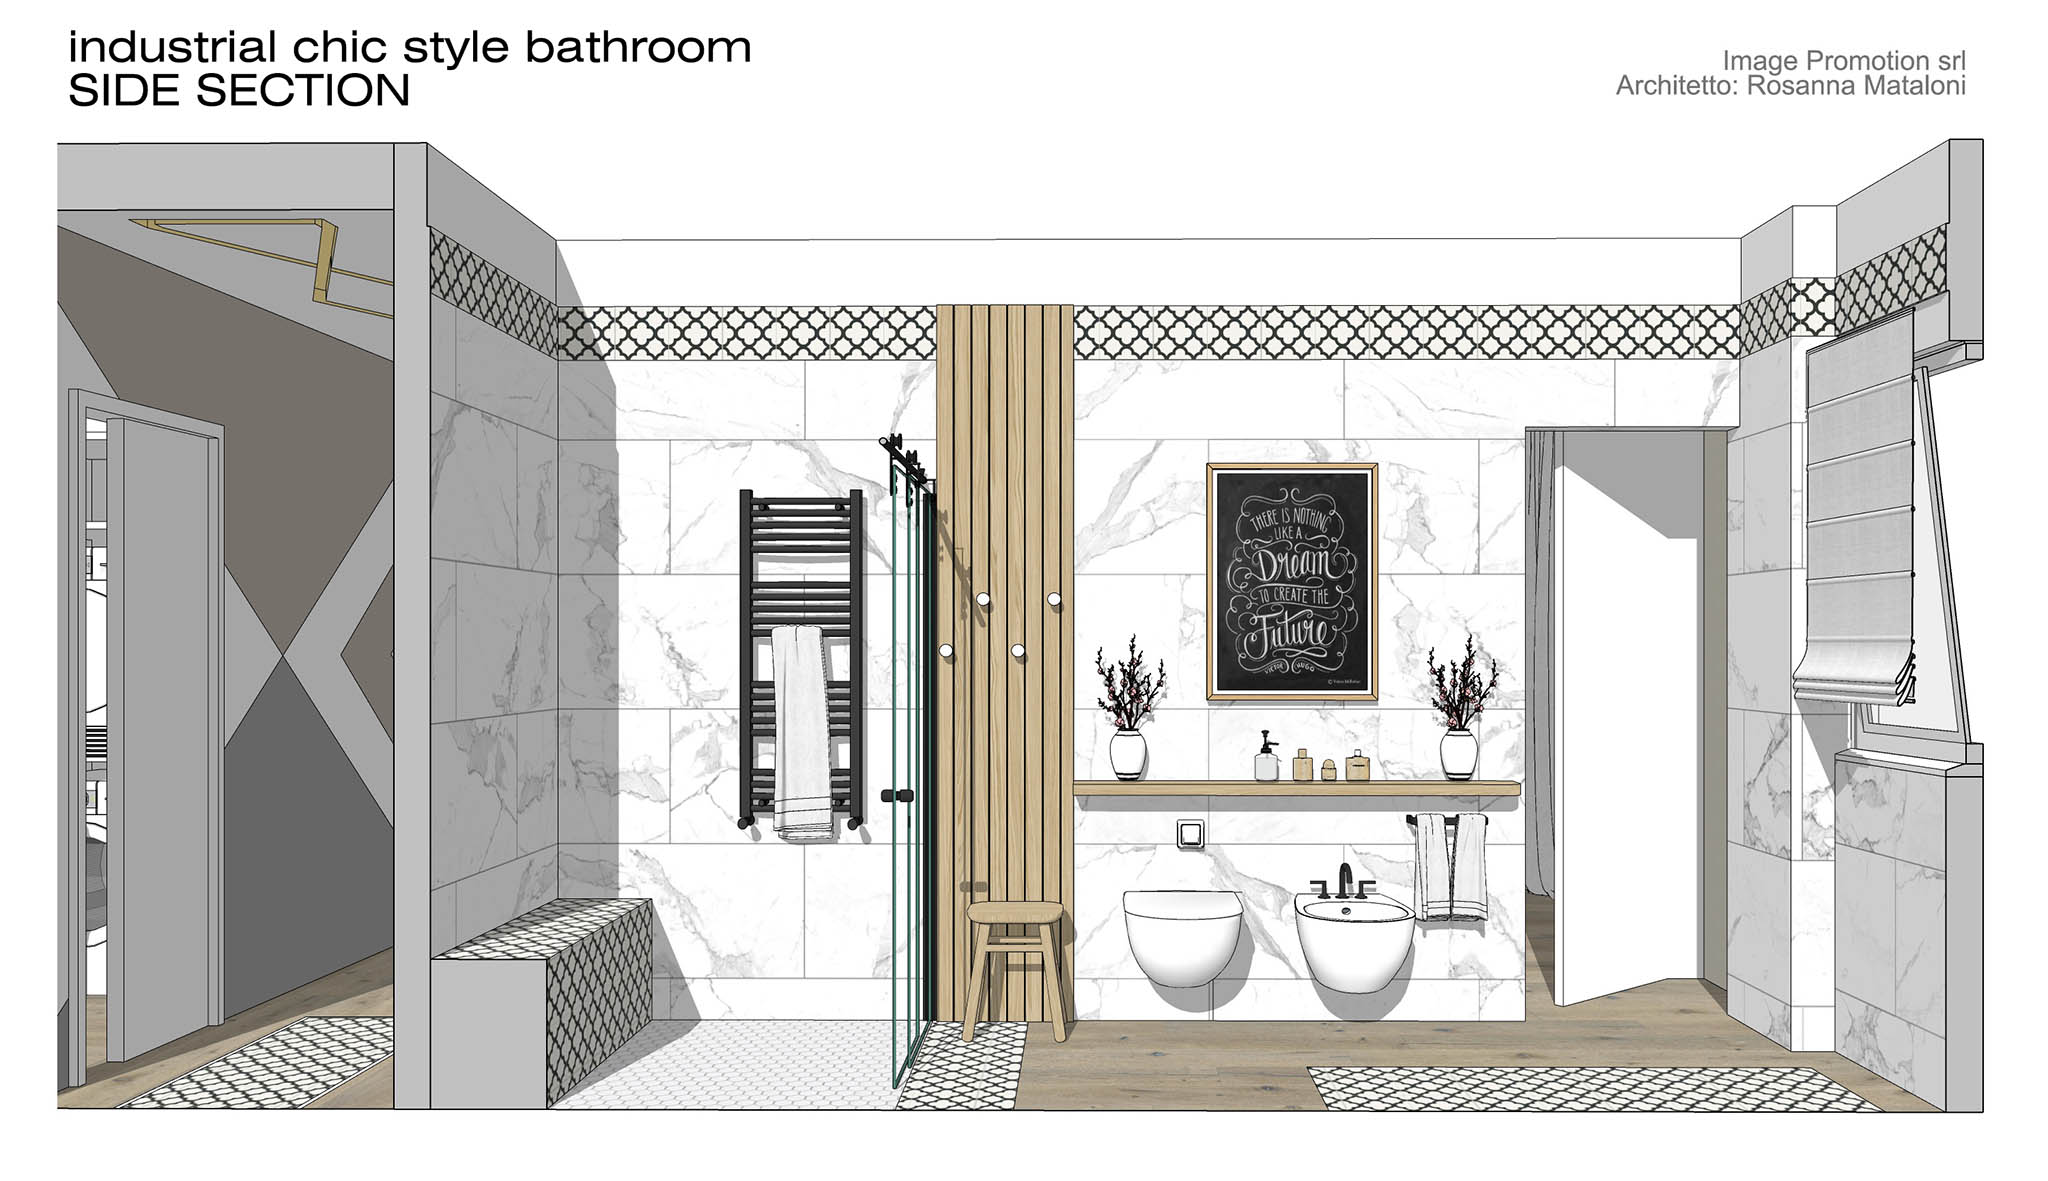 industrial chic style bathroom - SIDE SECTION